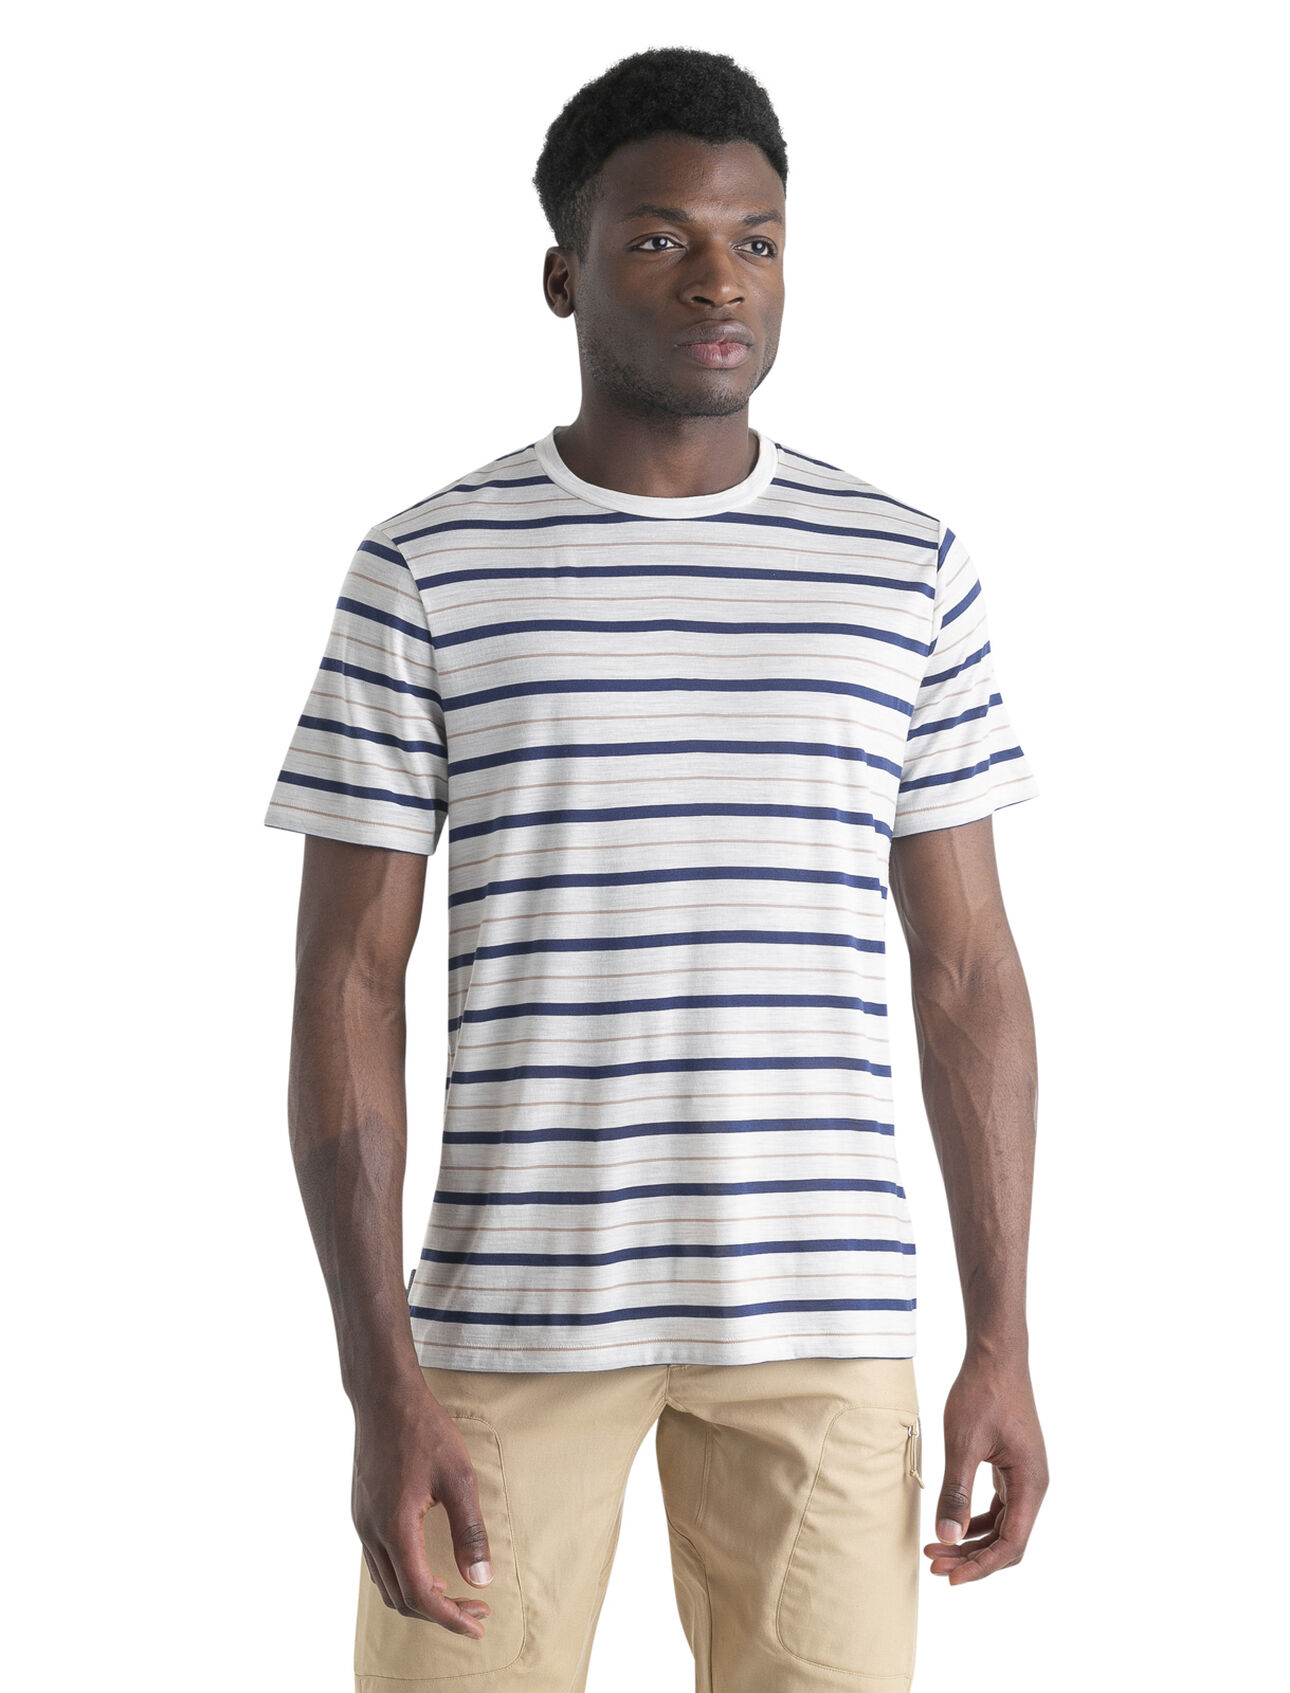 Mens Merino Blend Wave T-Shirt Stripe A lightweight merino-blend tee with classic style that's perfect for warm weather, the Wave Short Sleeve Tee Stripe features our breathable, all-natural Cool-Lite™ jersey fabric.